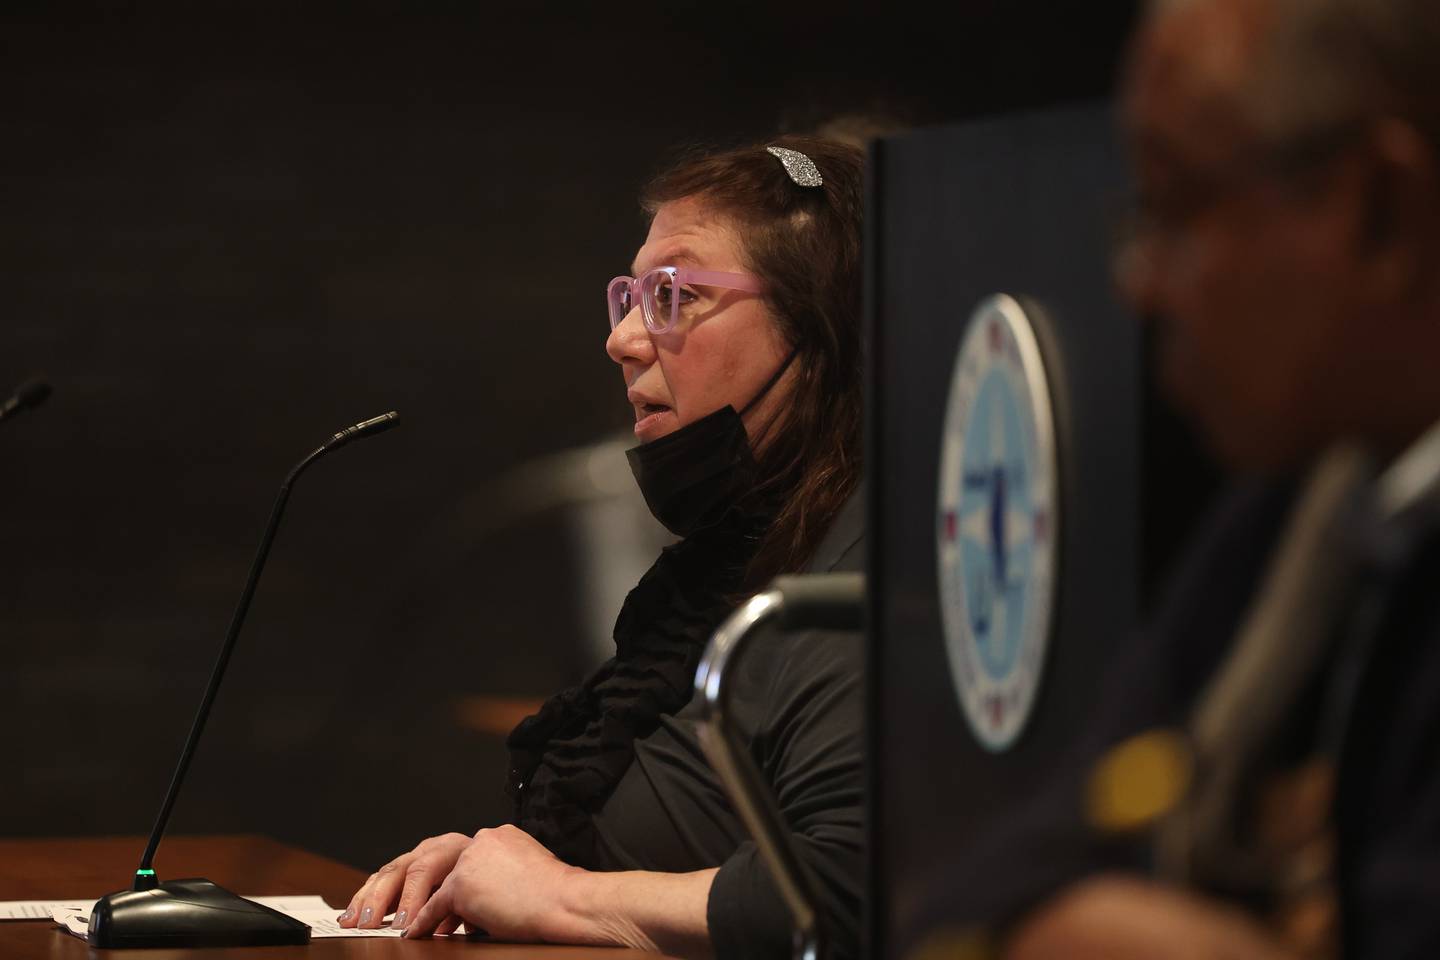 Kathy Spieler speaks against Michael Carruthers’ City Council candidacy at a hearing on the validity of his nominating petitions at the Joliet City Electoral Board meeting on January 4th.